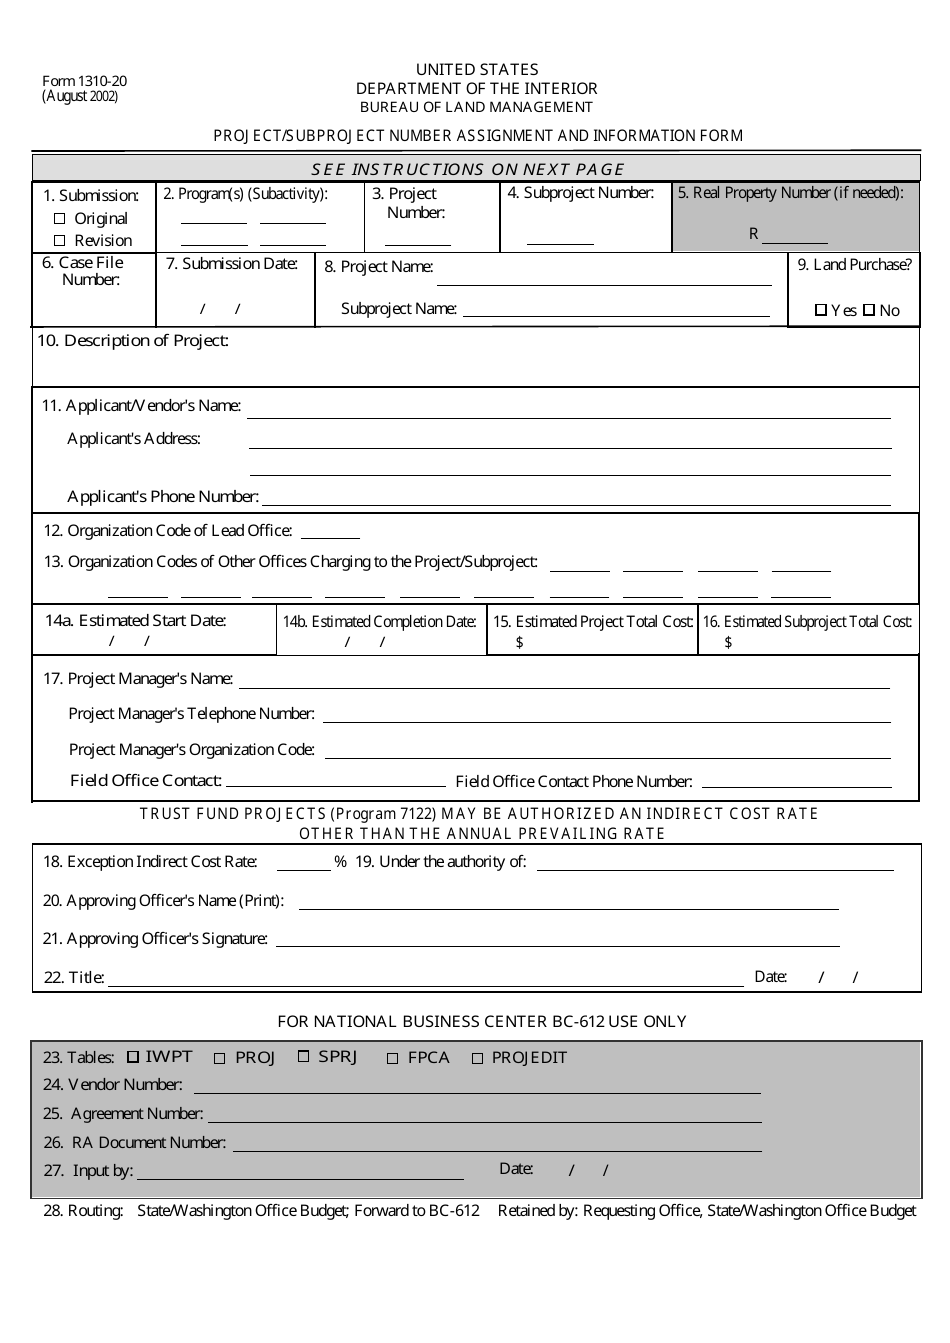 Form 1310-20 Project / Subproject Number Assignment and Information Form, Page 1